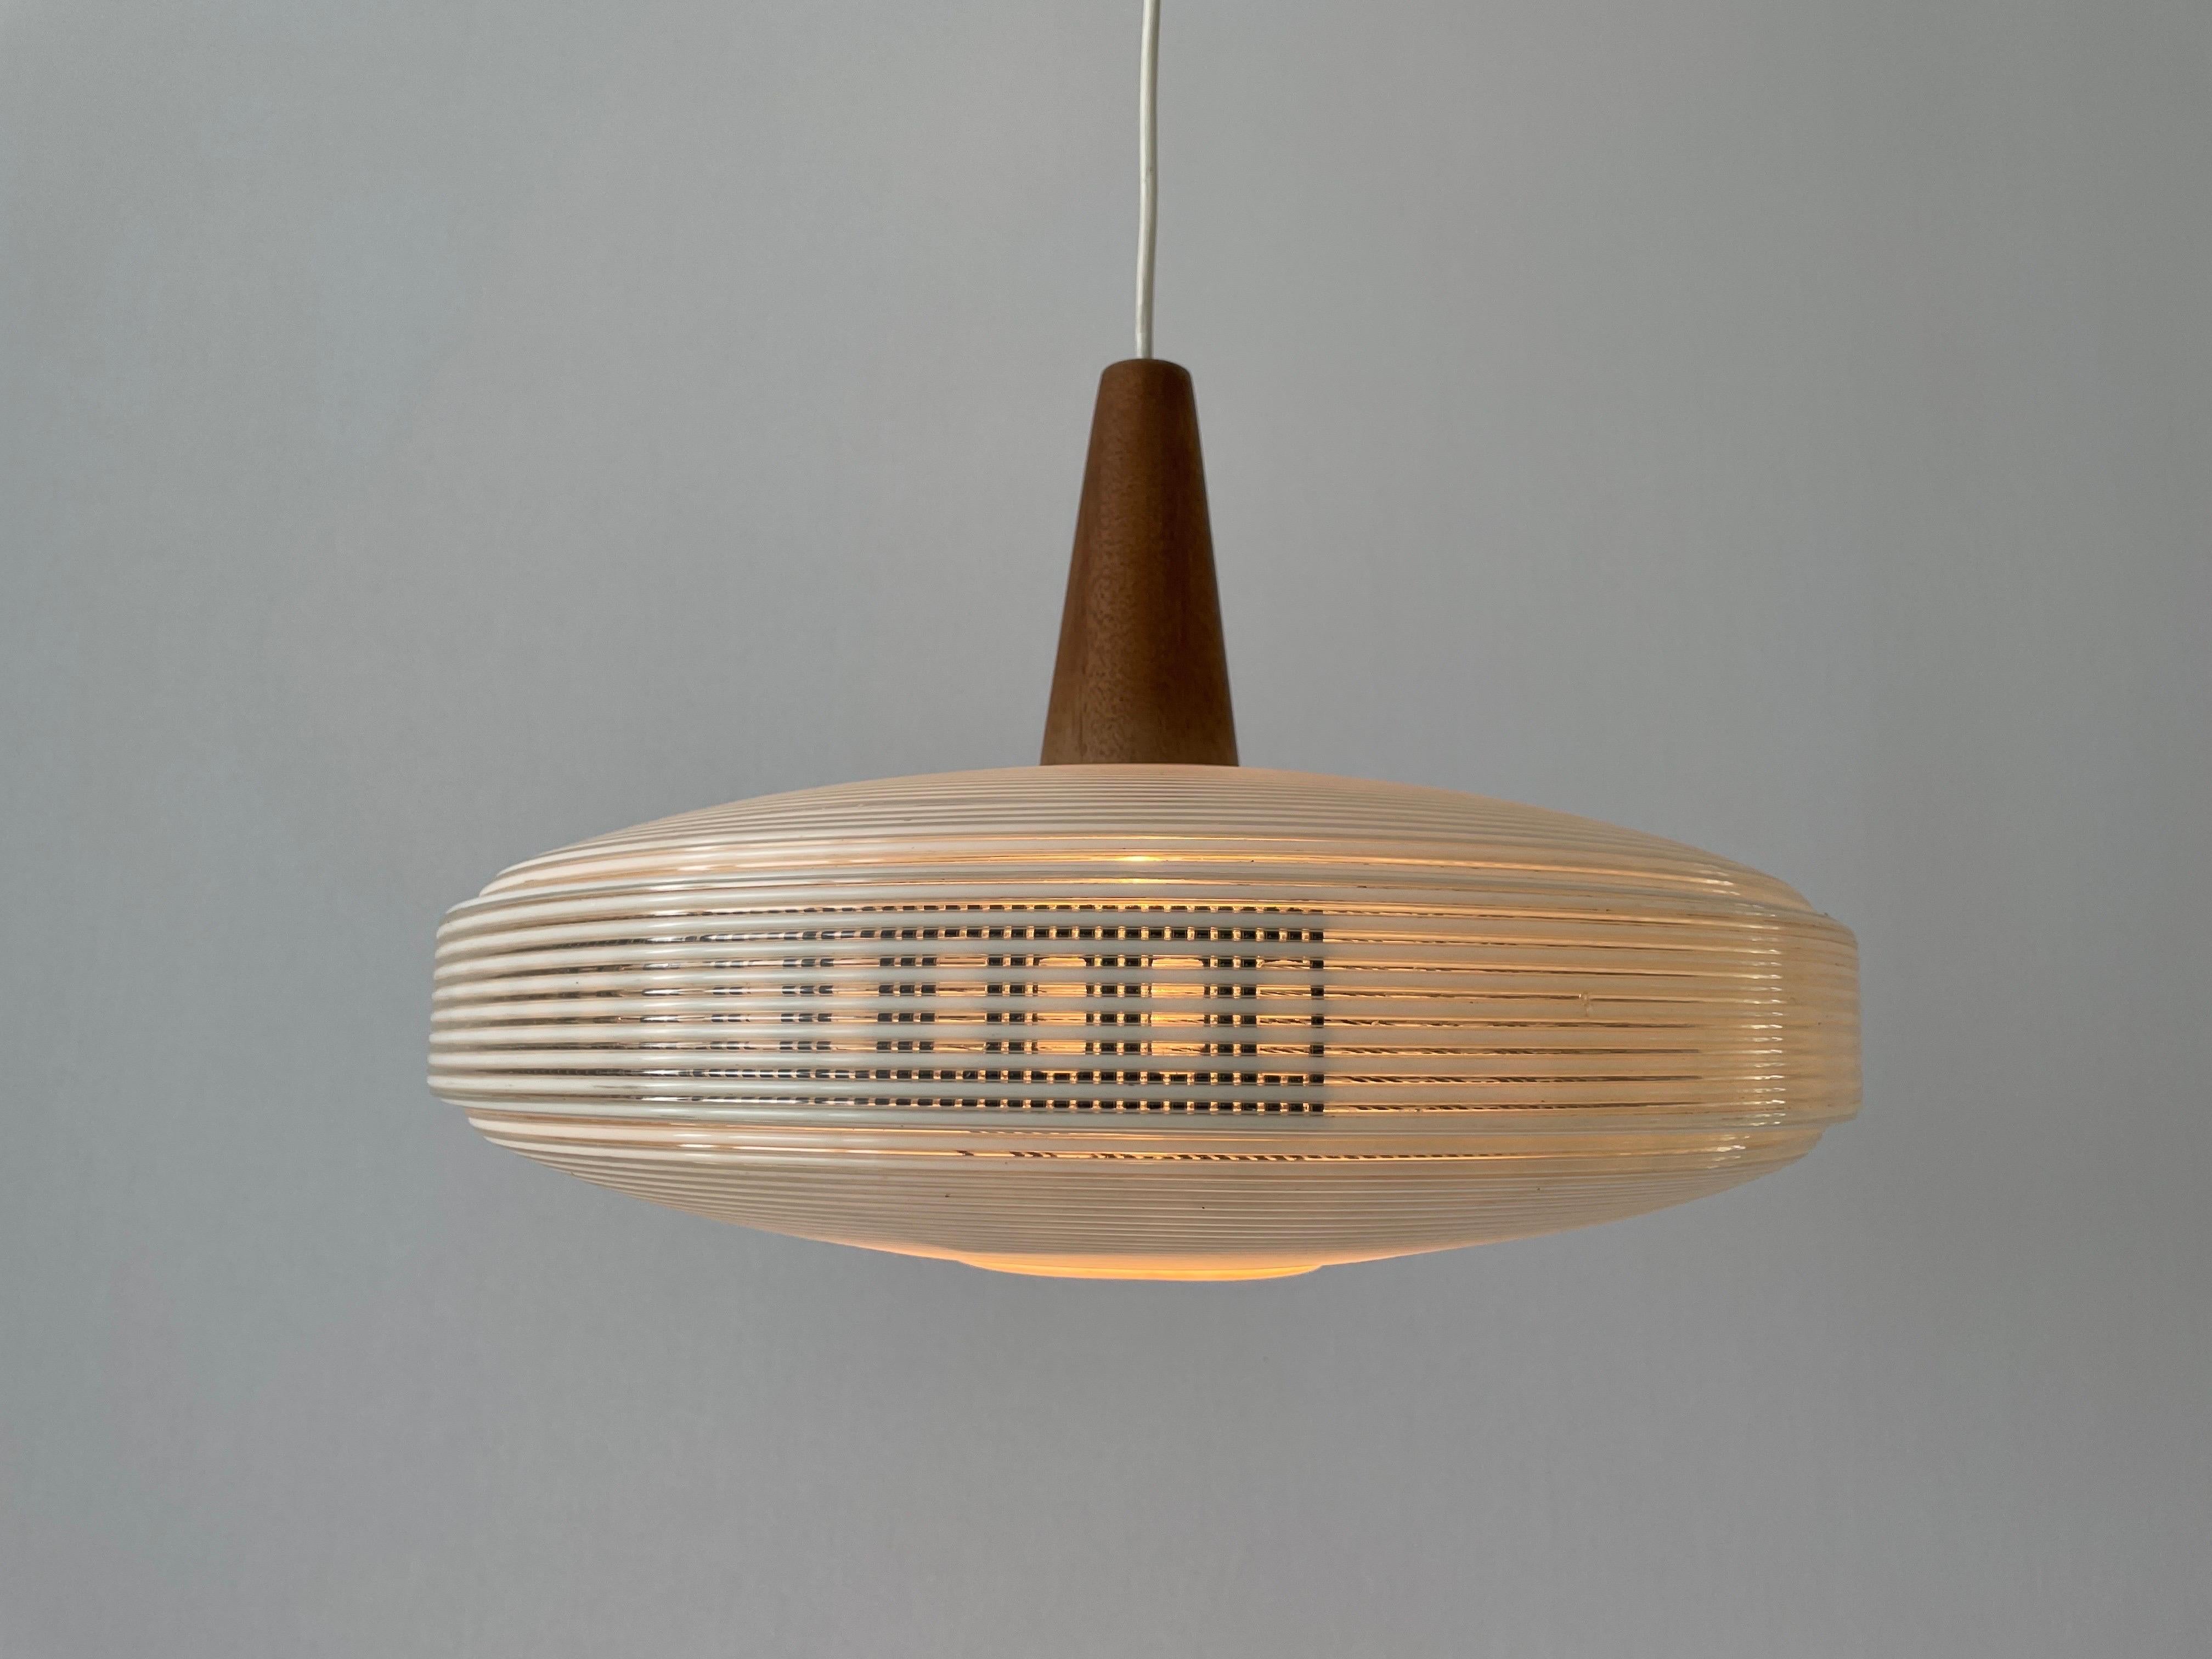 Rare Rotaflex Ceiling Lamp by Yasha Heifetz with Teak Detail, 1960s Germany For Sale 2